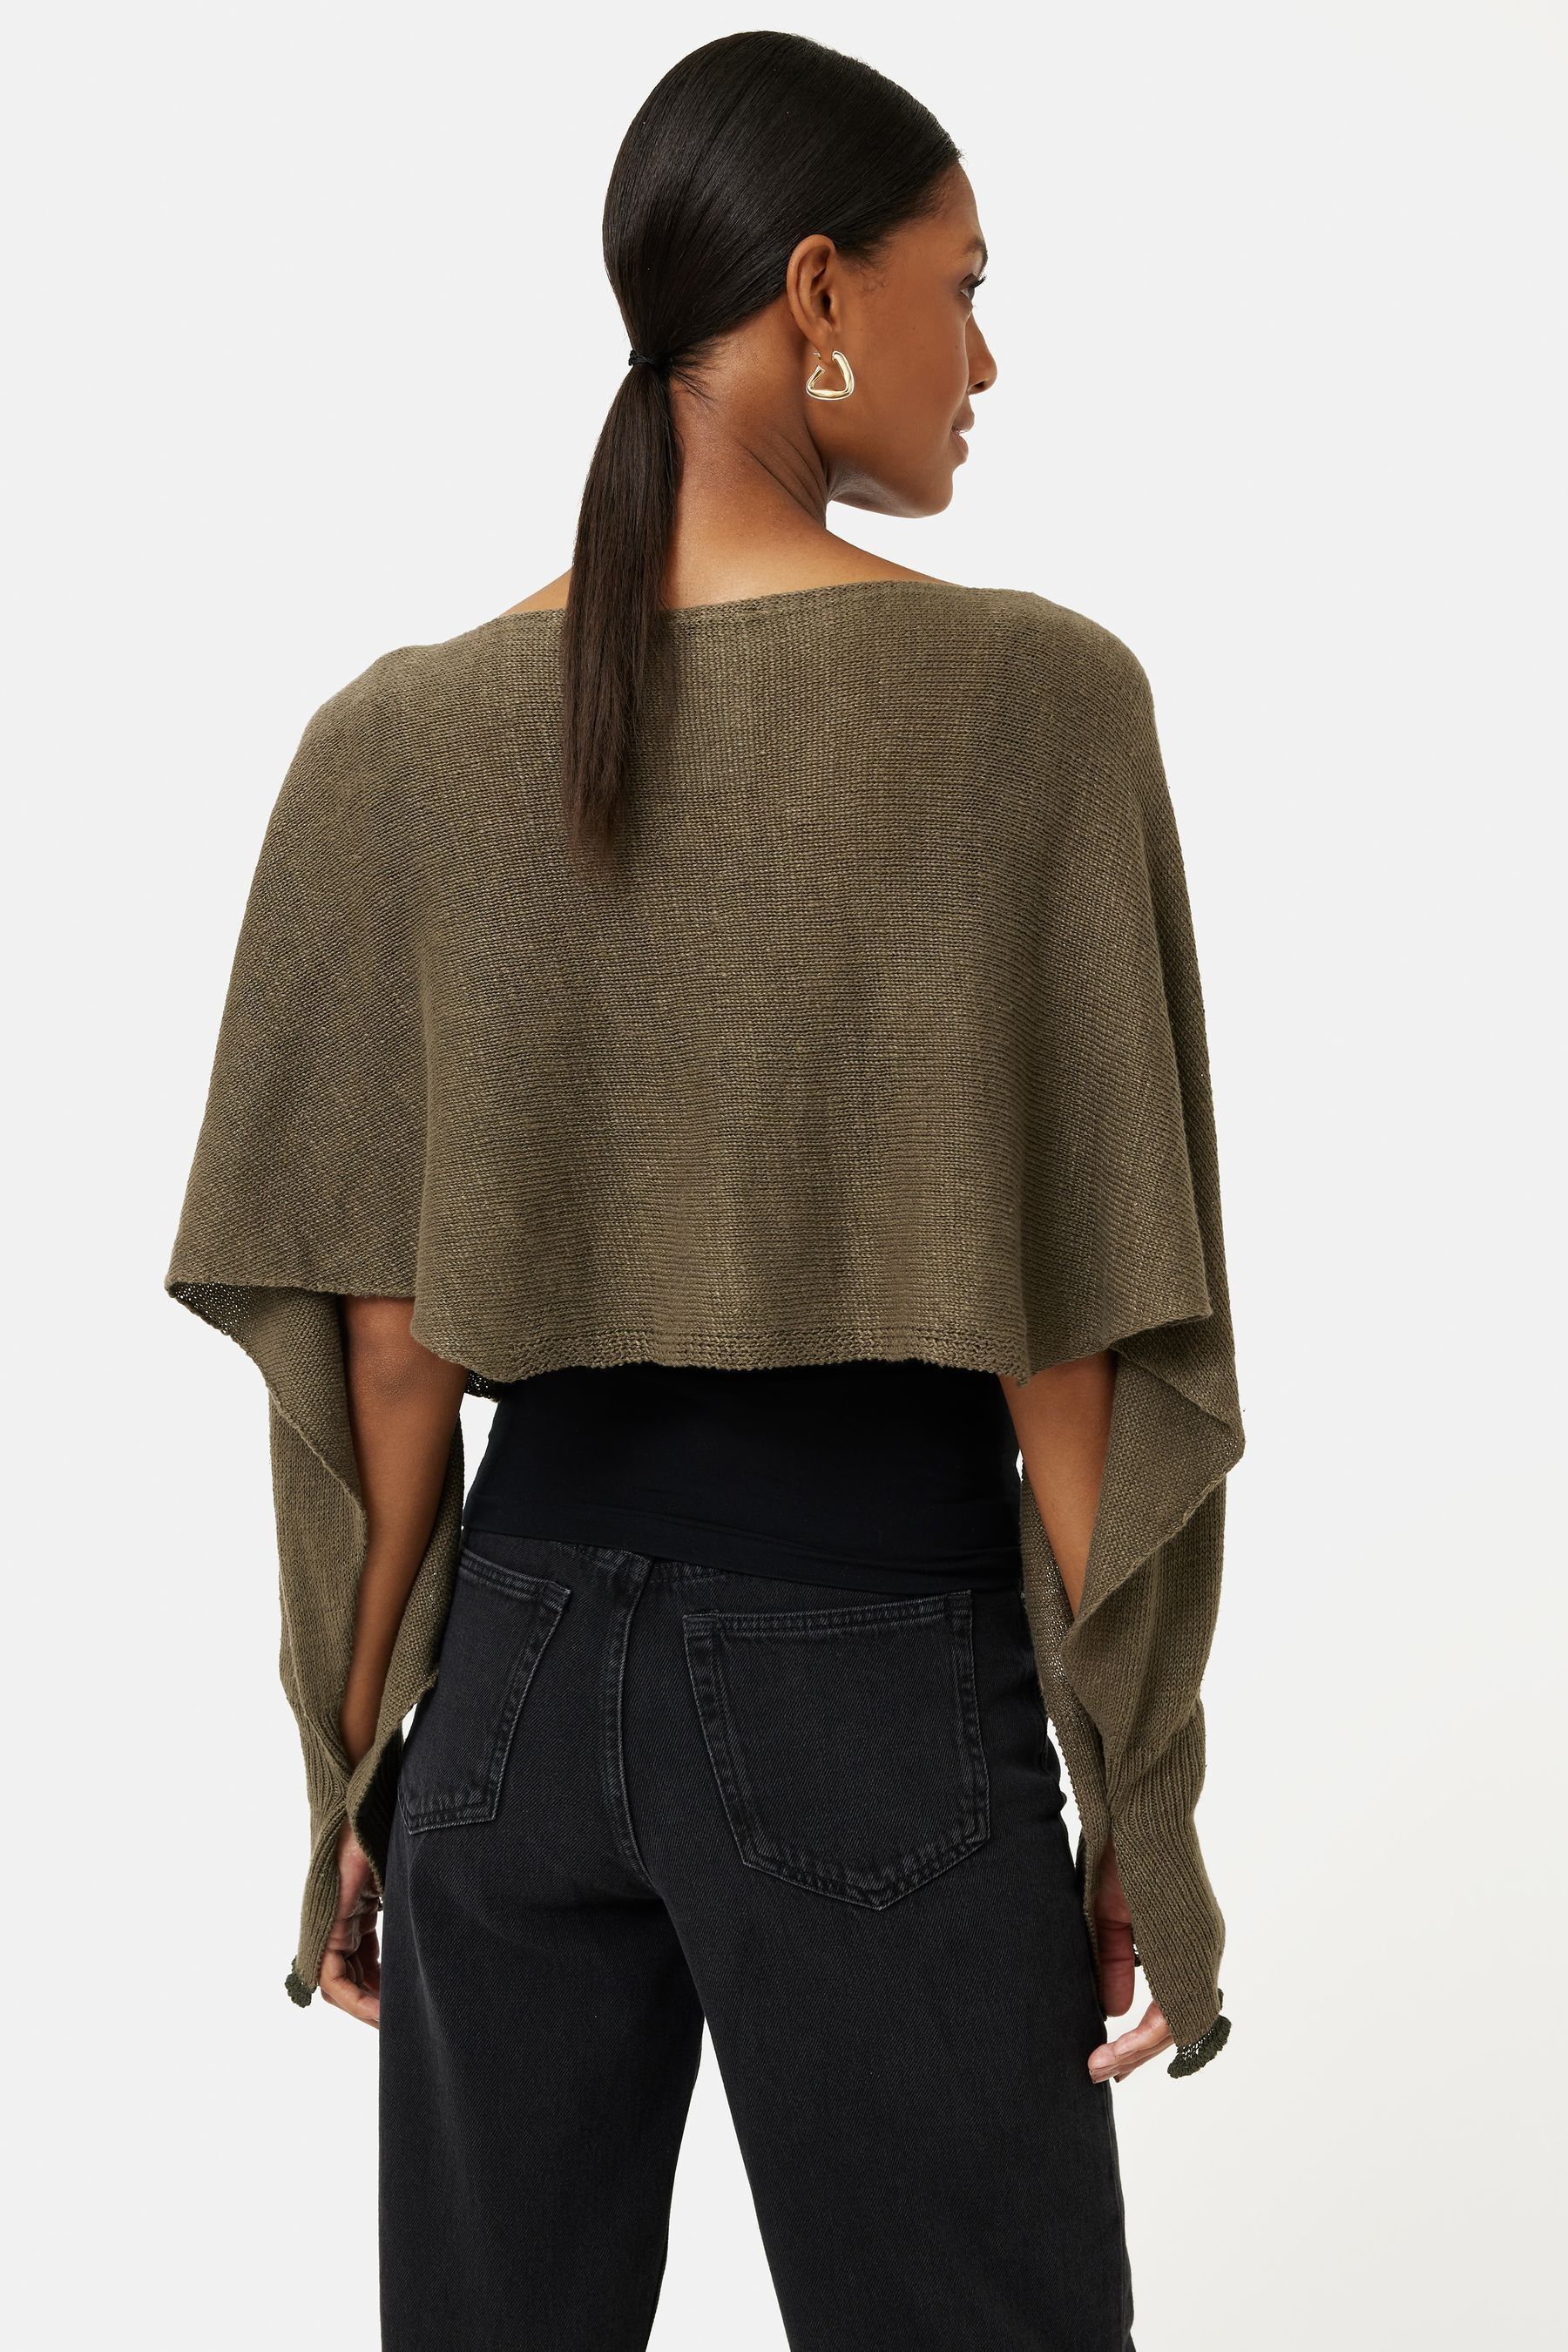 Buy Jigsaw Pure Linen Poncho Jumper from the Next UK online shop